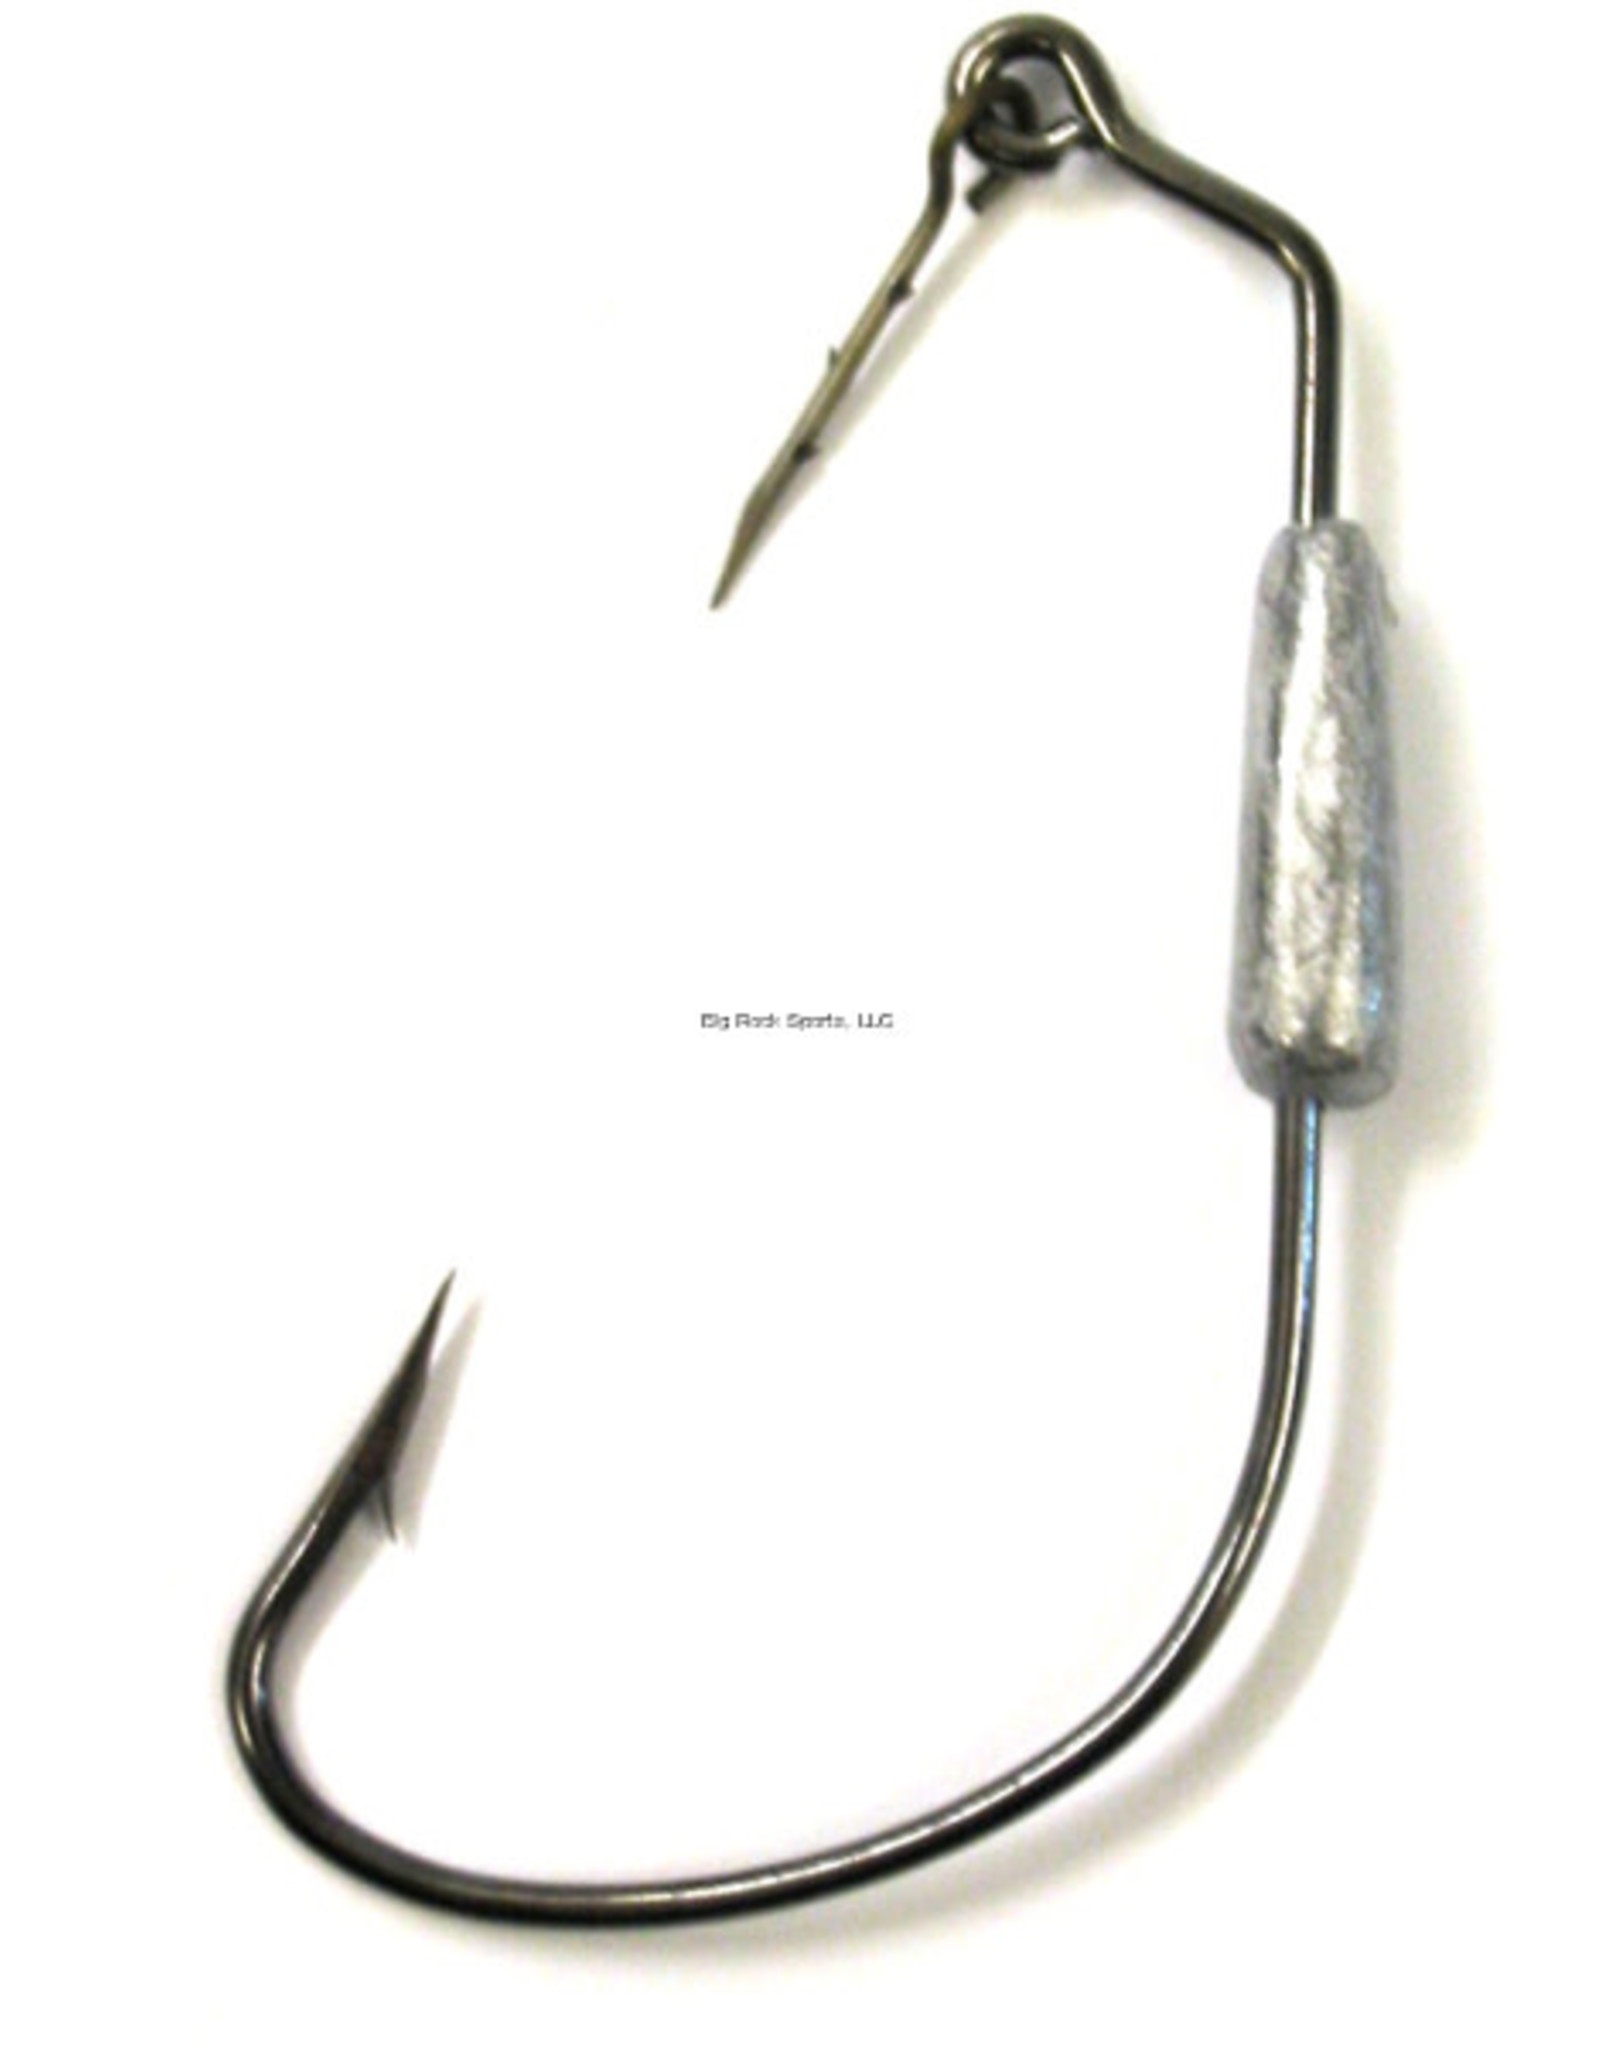 Eagle Claw Eagle Claw L11114G-3/0 Lazer Sharp Swimbait Hook with Spring, Size 3/0, 1/4 oz, Needle Point, Platinum Black, 3 per Pack